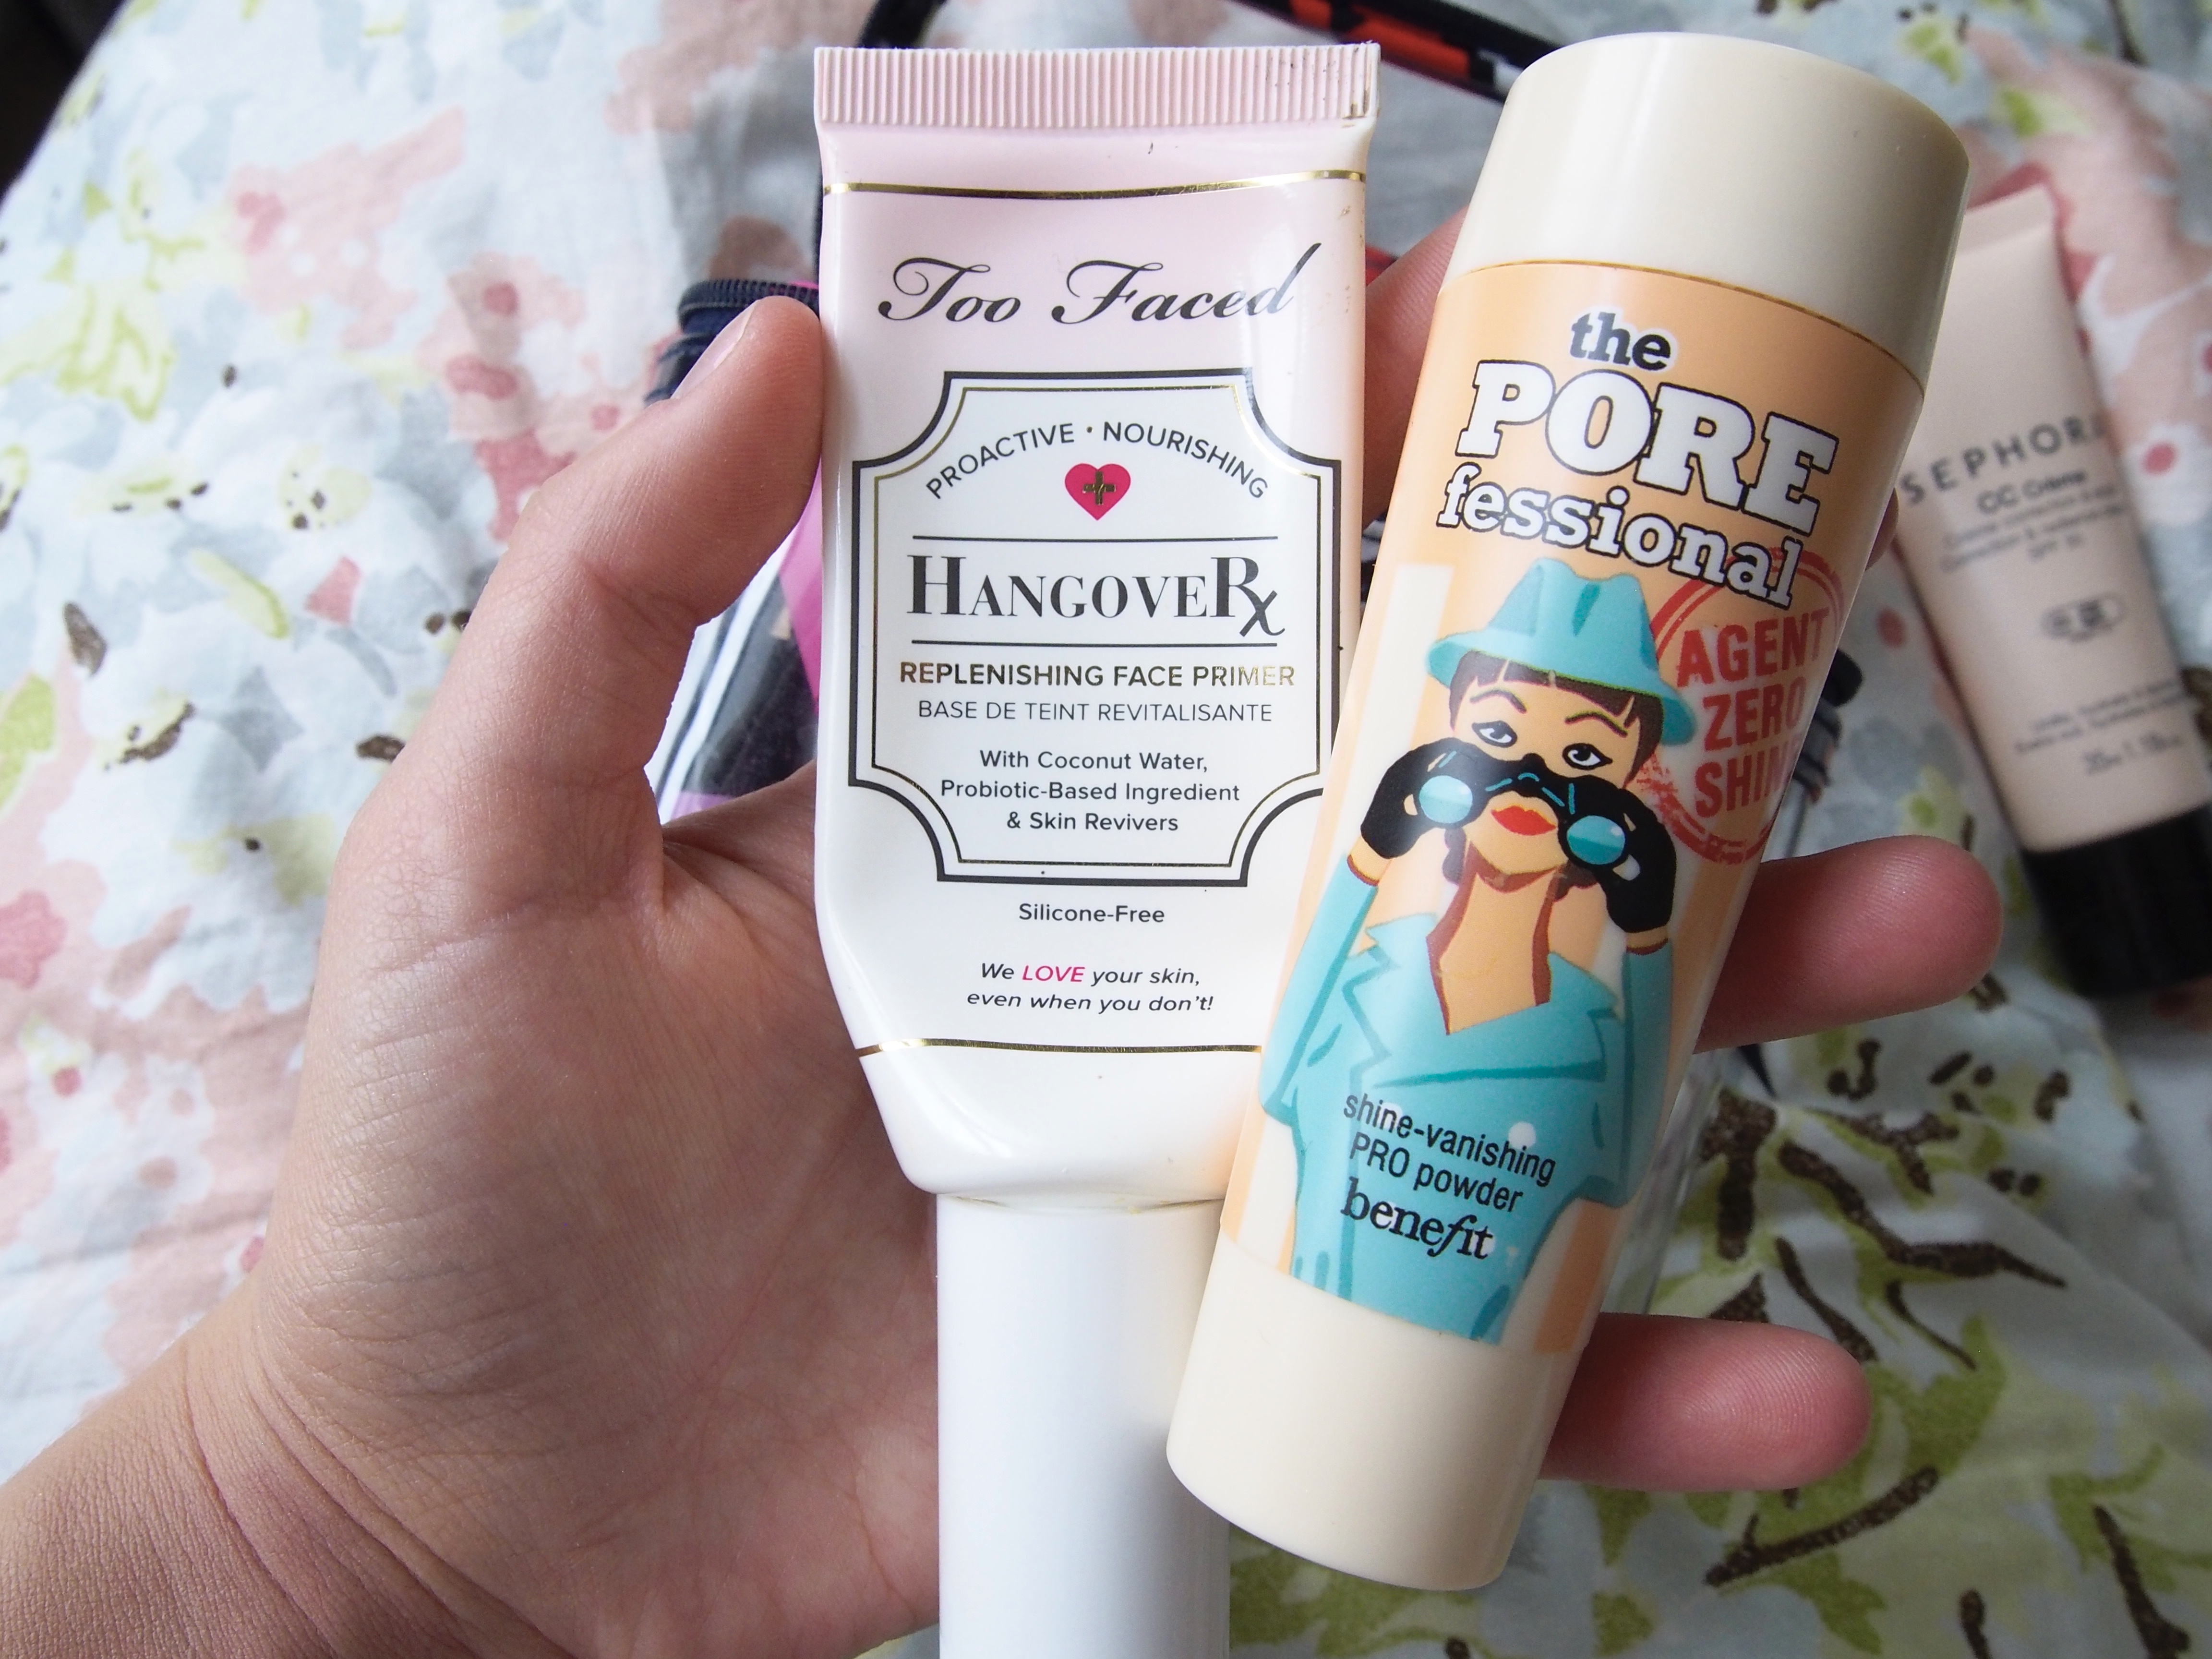 Makeup To Use Up - Too Faced Hangover and Benefit License to Blot